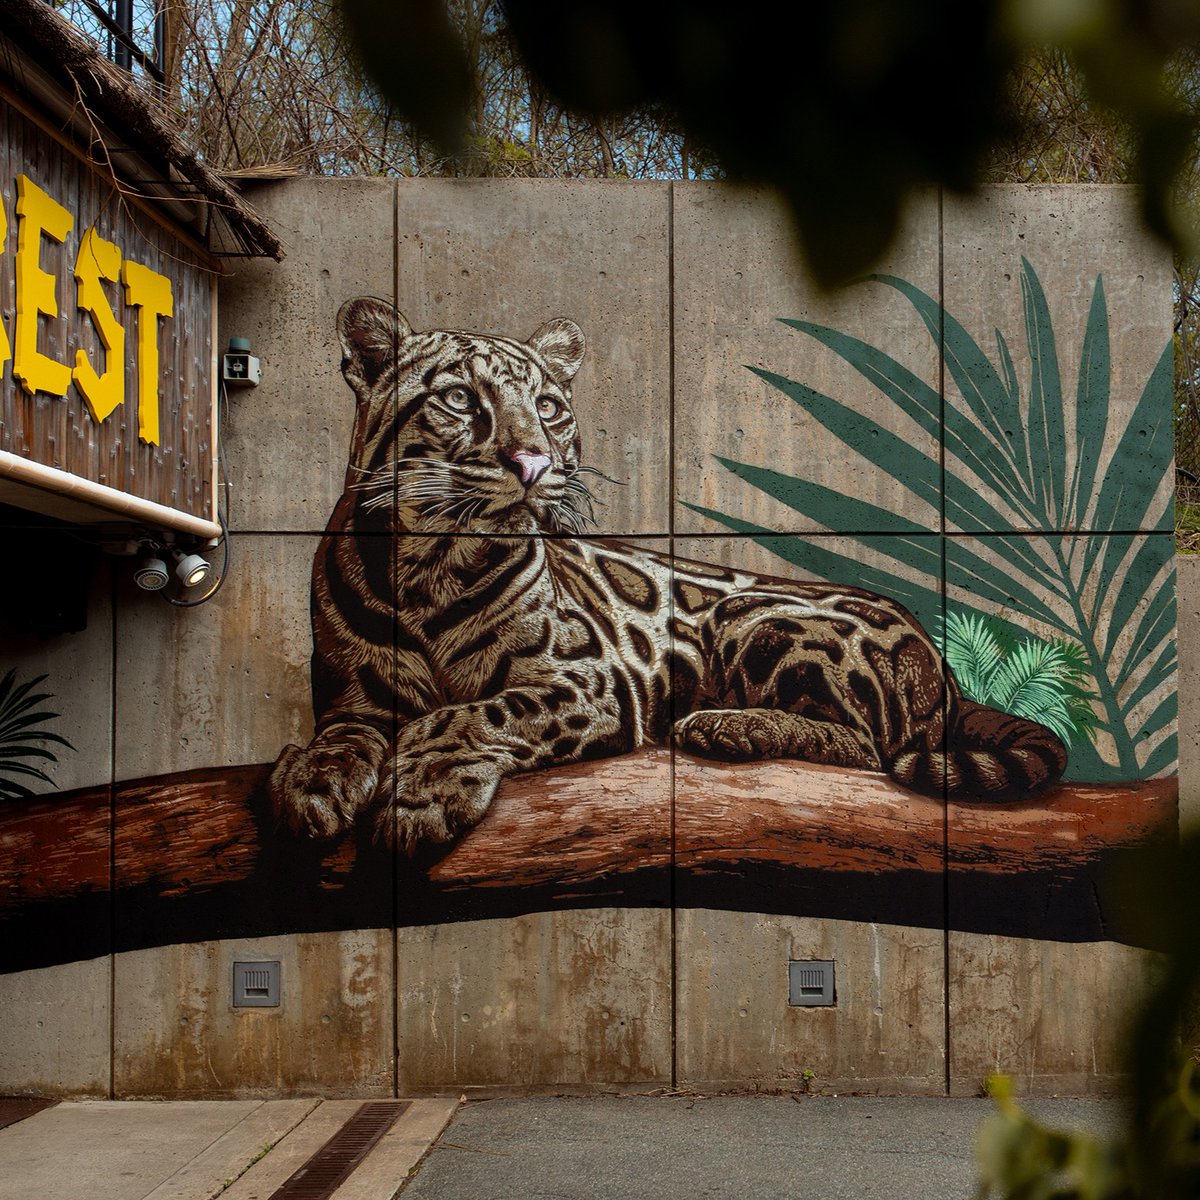 Babe, wake up. The incredible murals painstakingly created by @snikarts are complete—and we could not love them more. They inspire awe for our natural world and our global conservation efforts. Look for them the next time you visit #FranklinParkZoo! 📸 @keownphoto